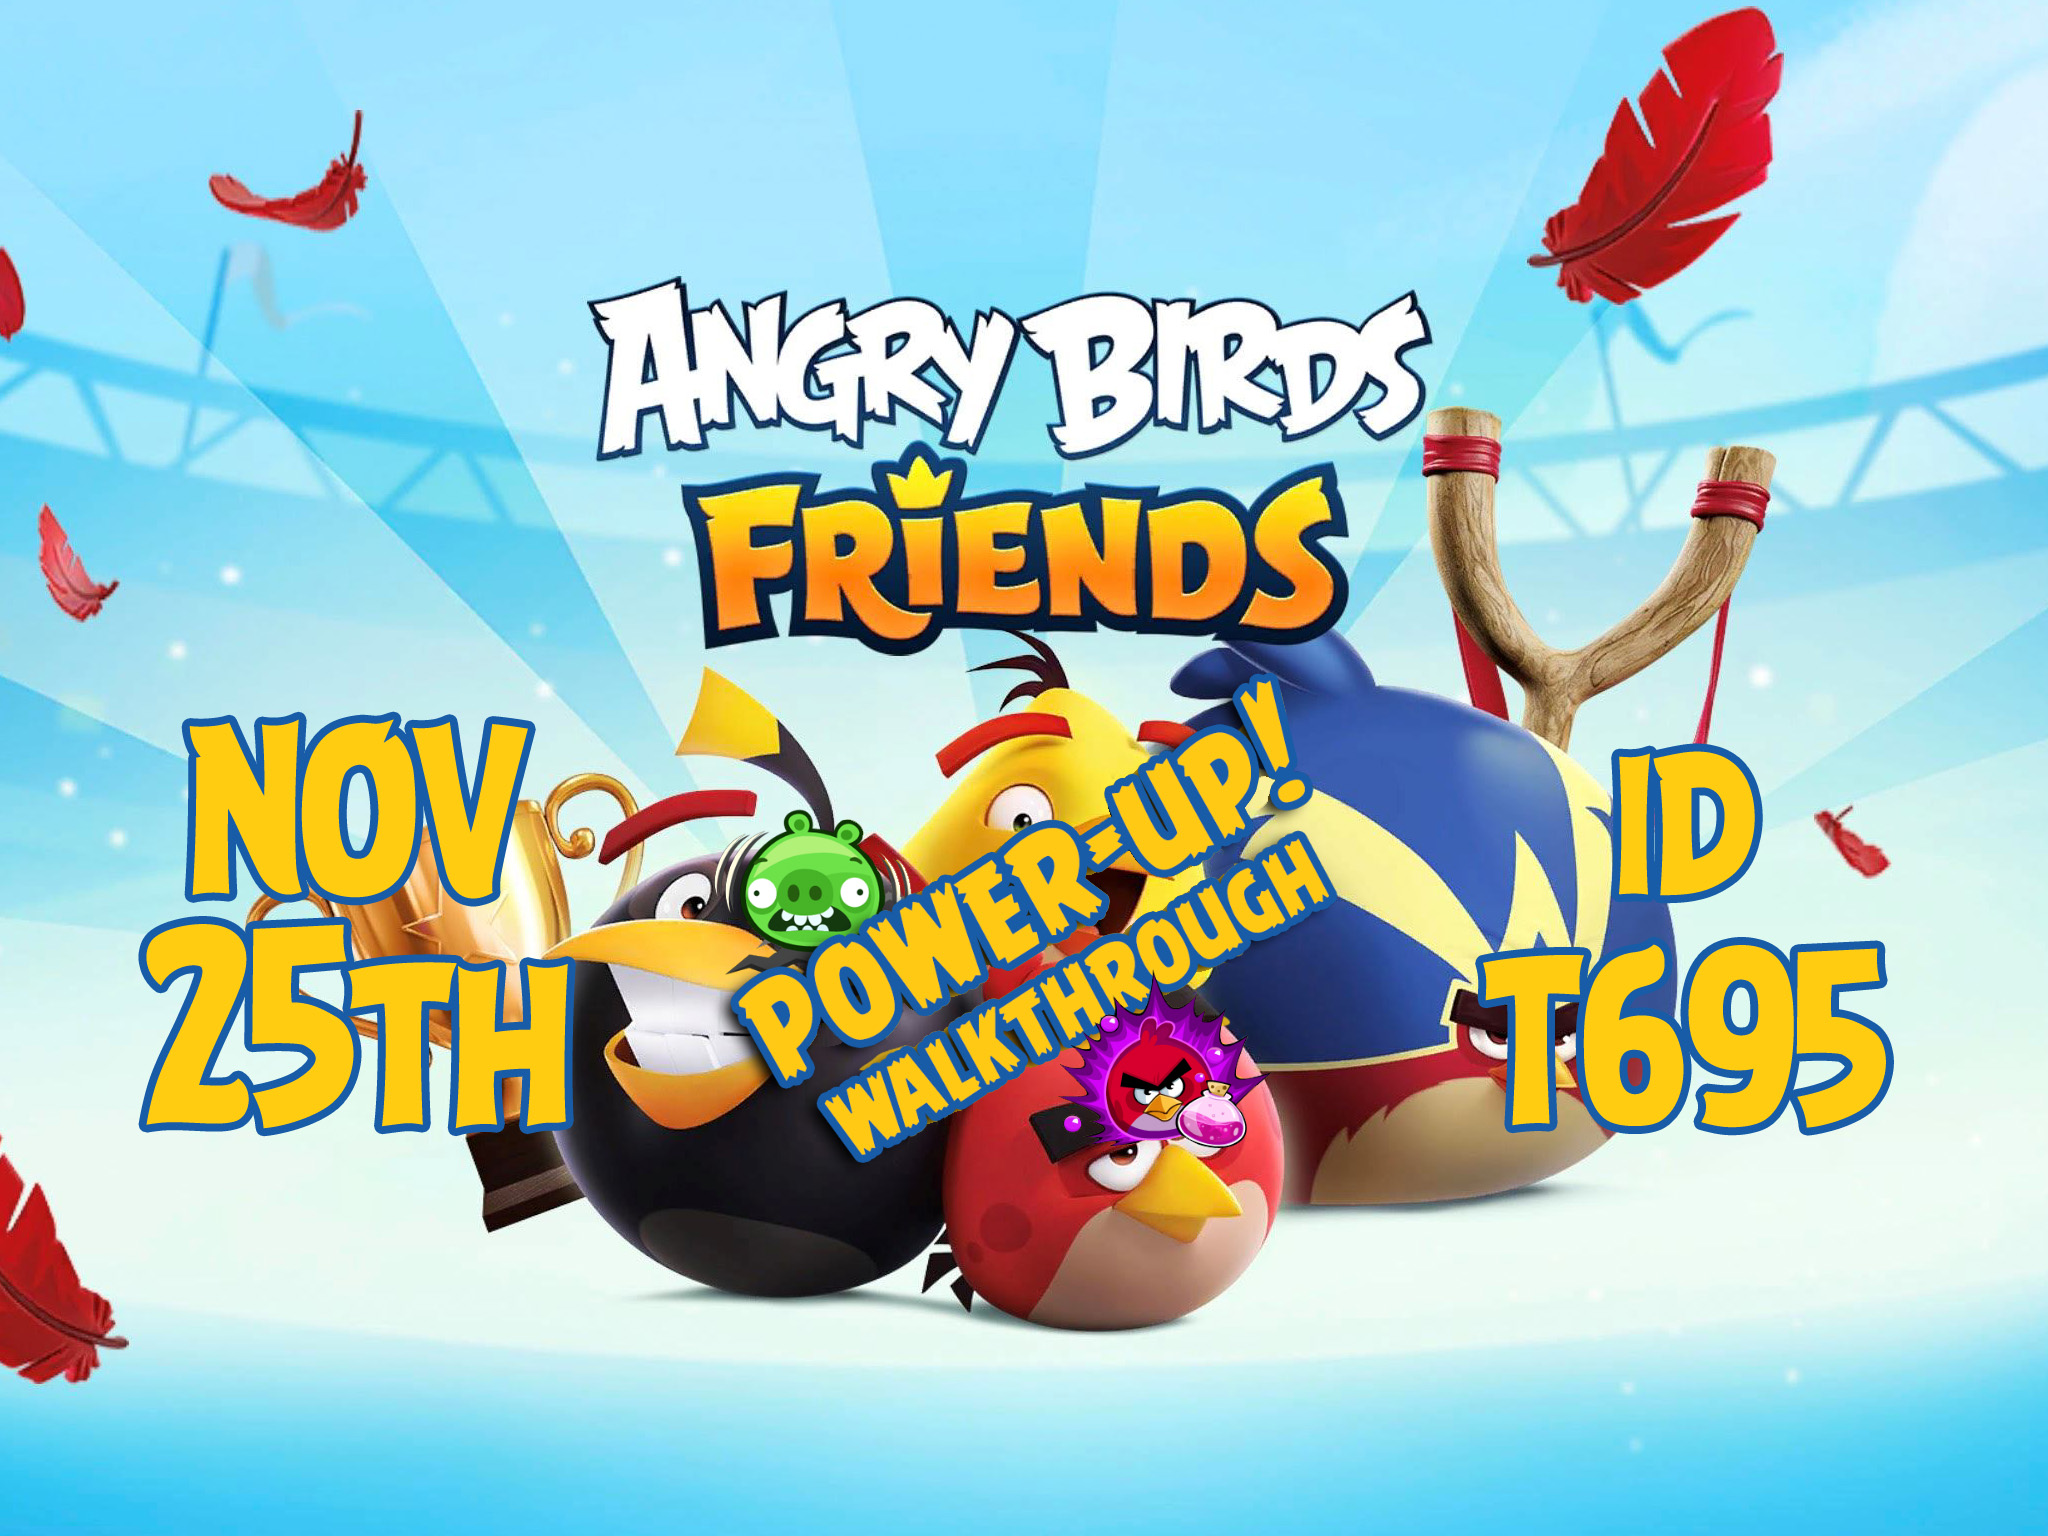 Angry-Birds-Friends-Tournament-T695-Feature-Image-PU